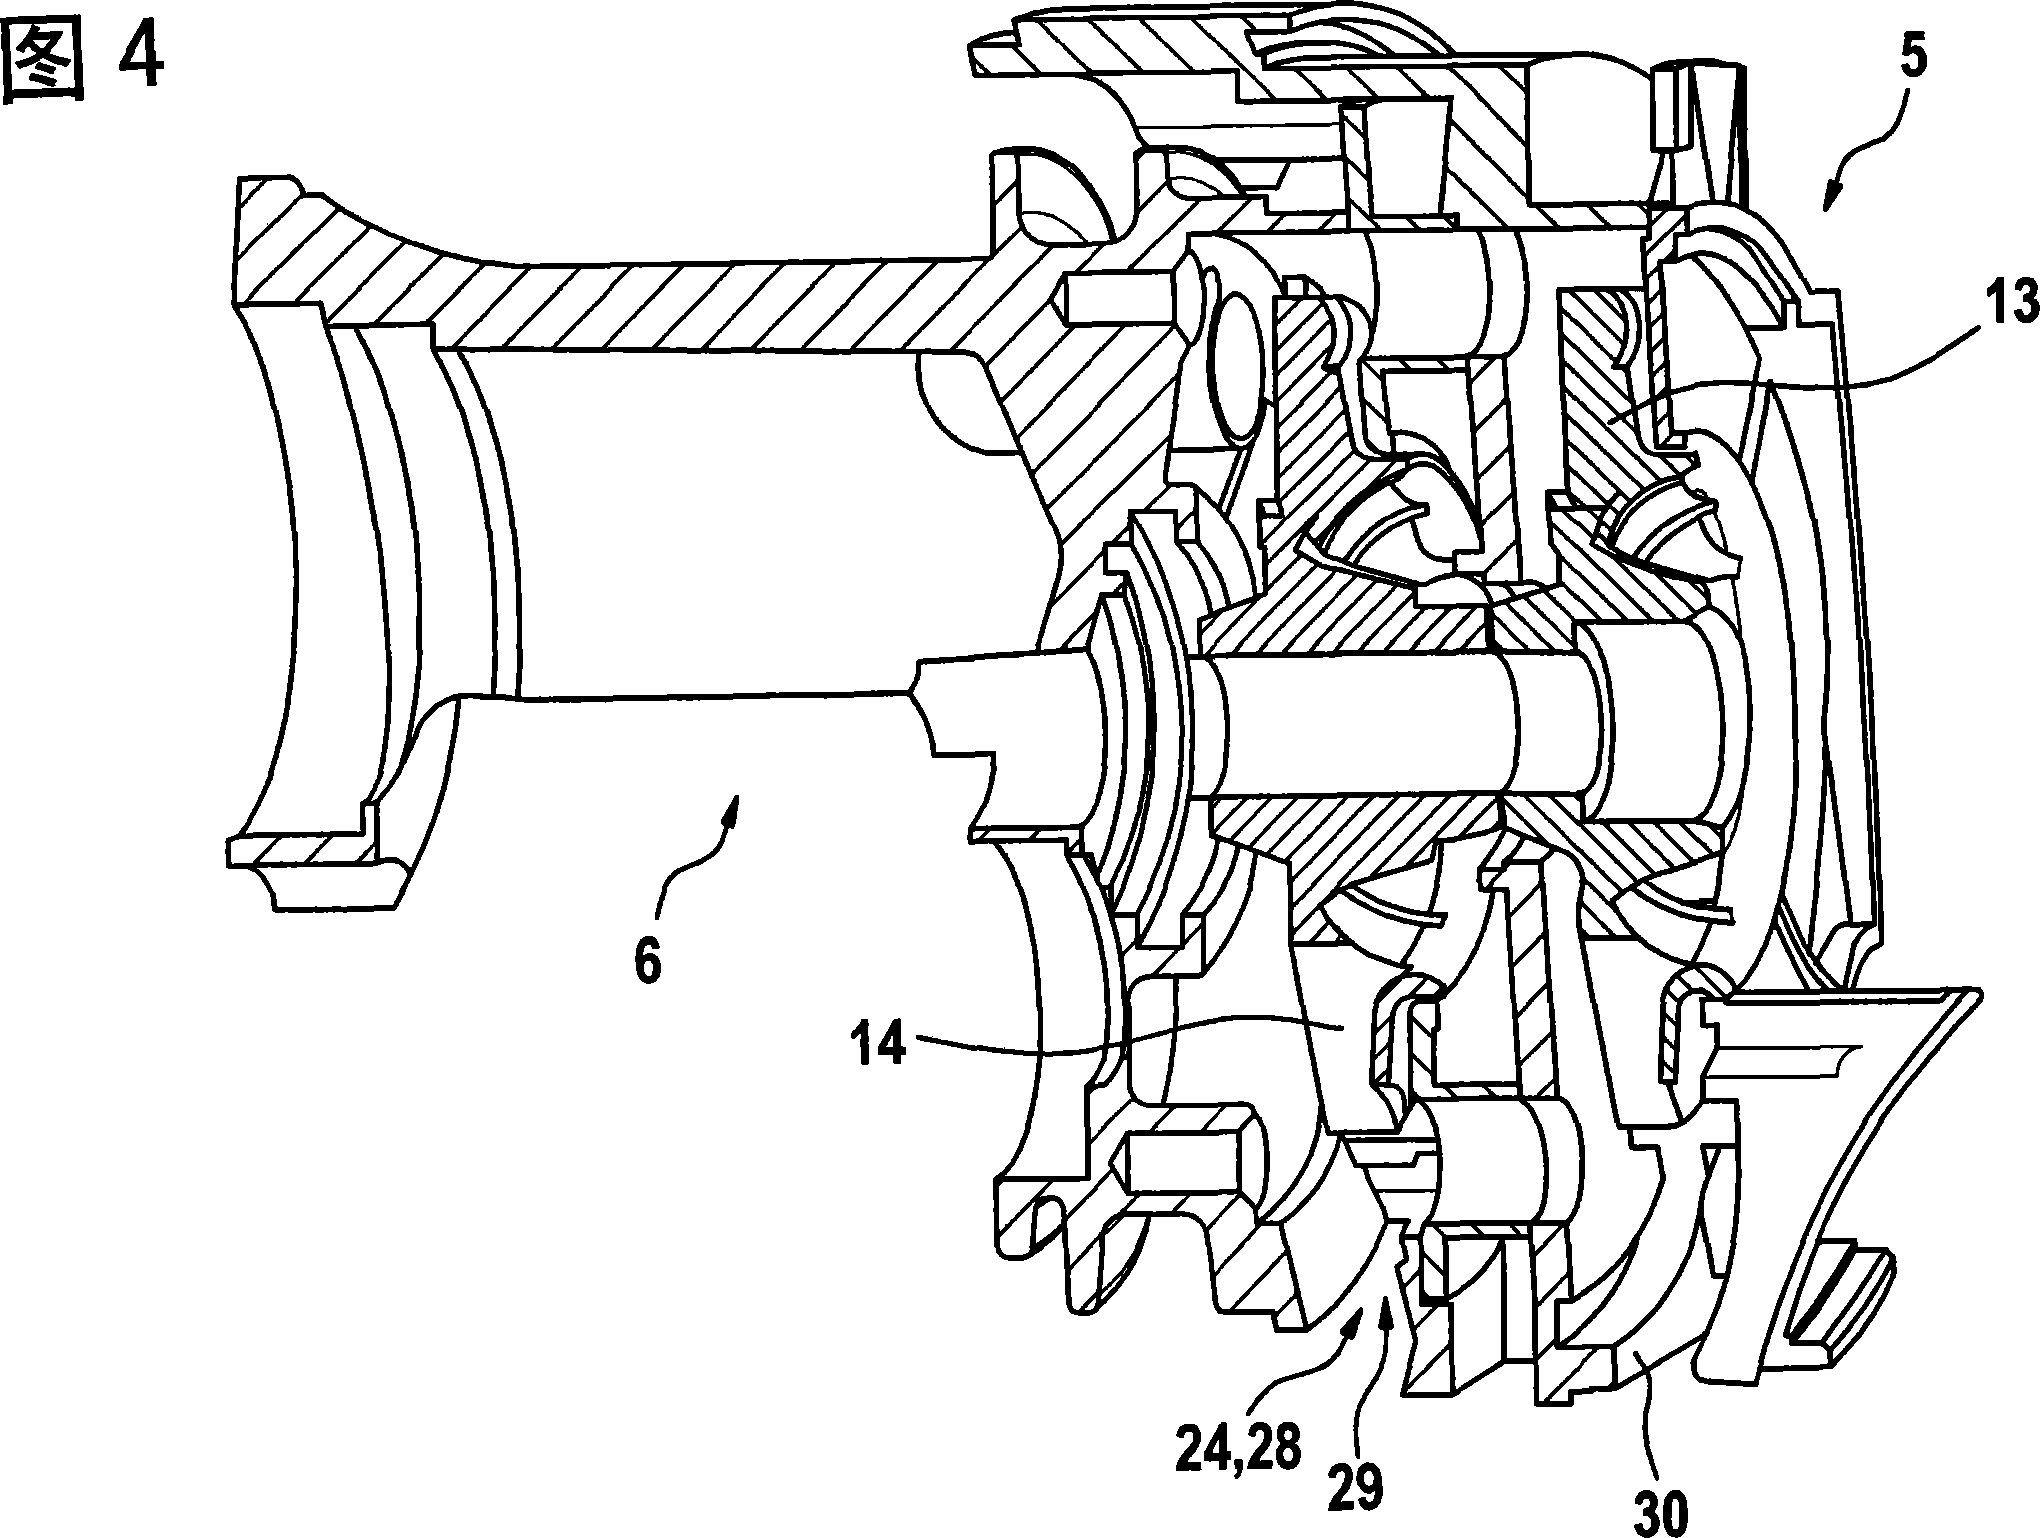 Handheld electrical tool with a suction module for a dust separation device